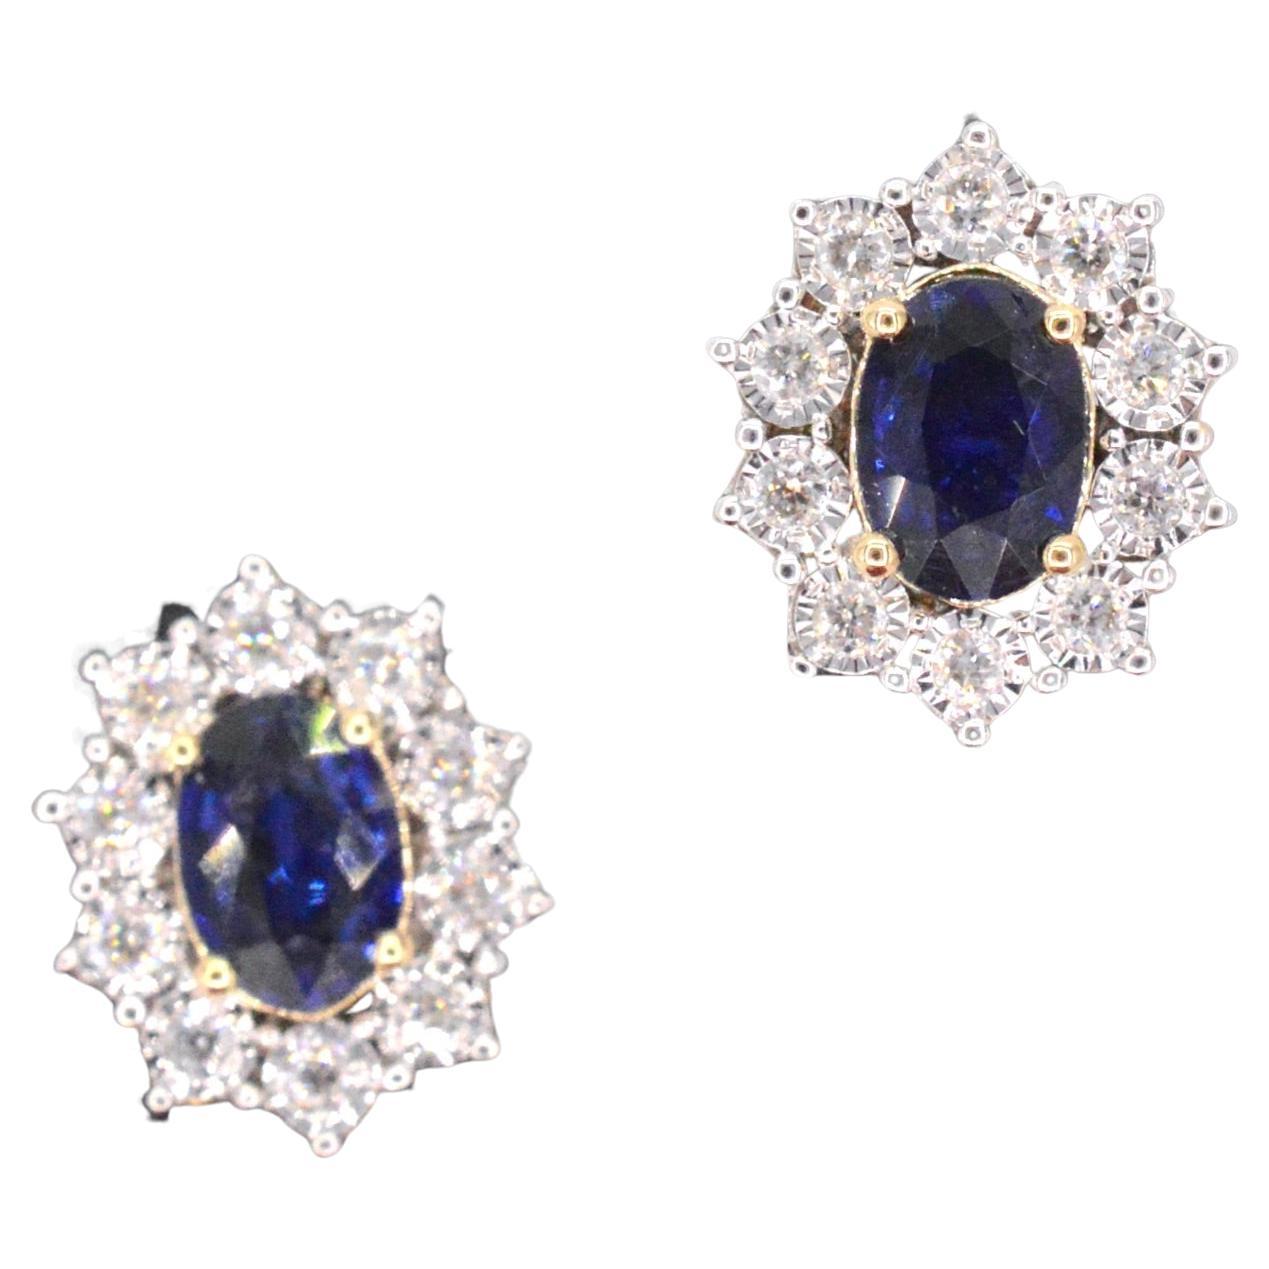 Gold Earrings with Diamonds and Sapphire